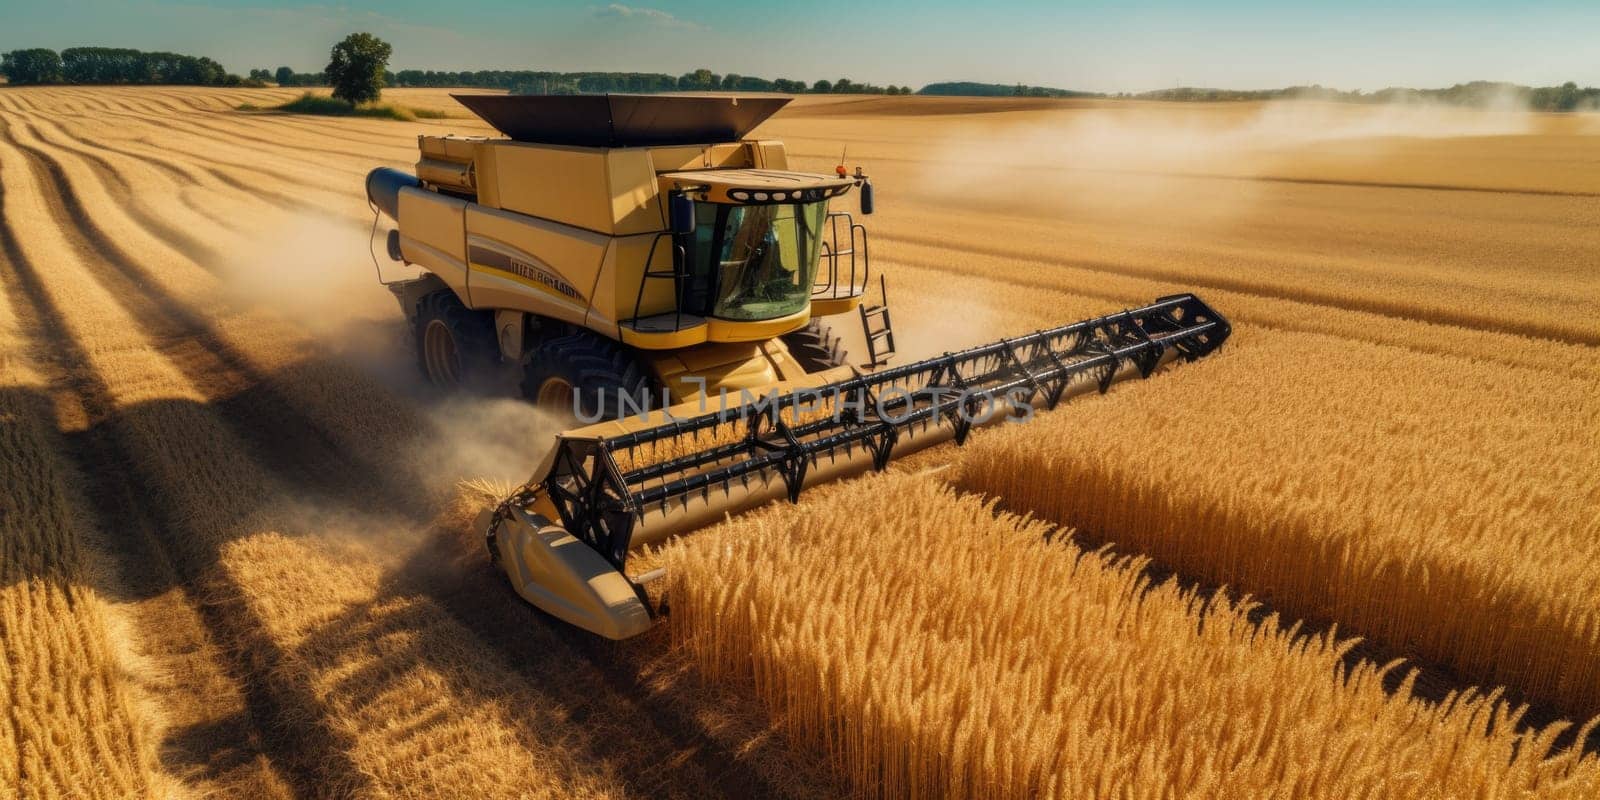 A combine is seen harvesting wheat in a field, collecting the ripe grain efficiently.